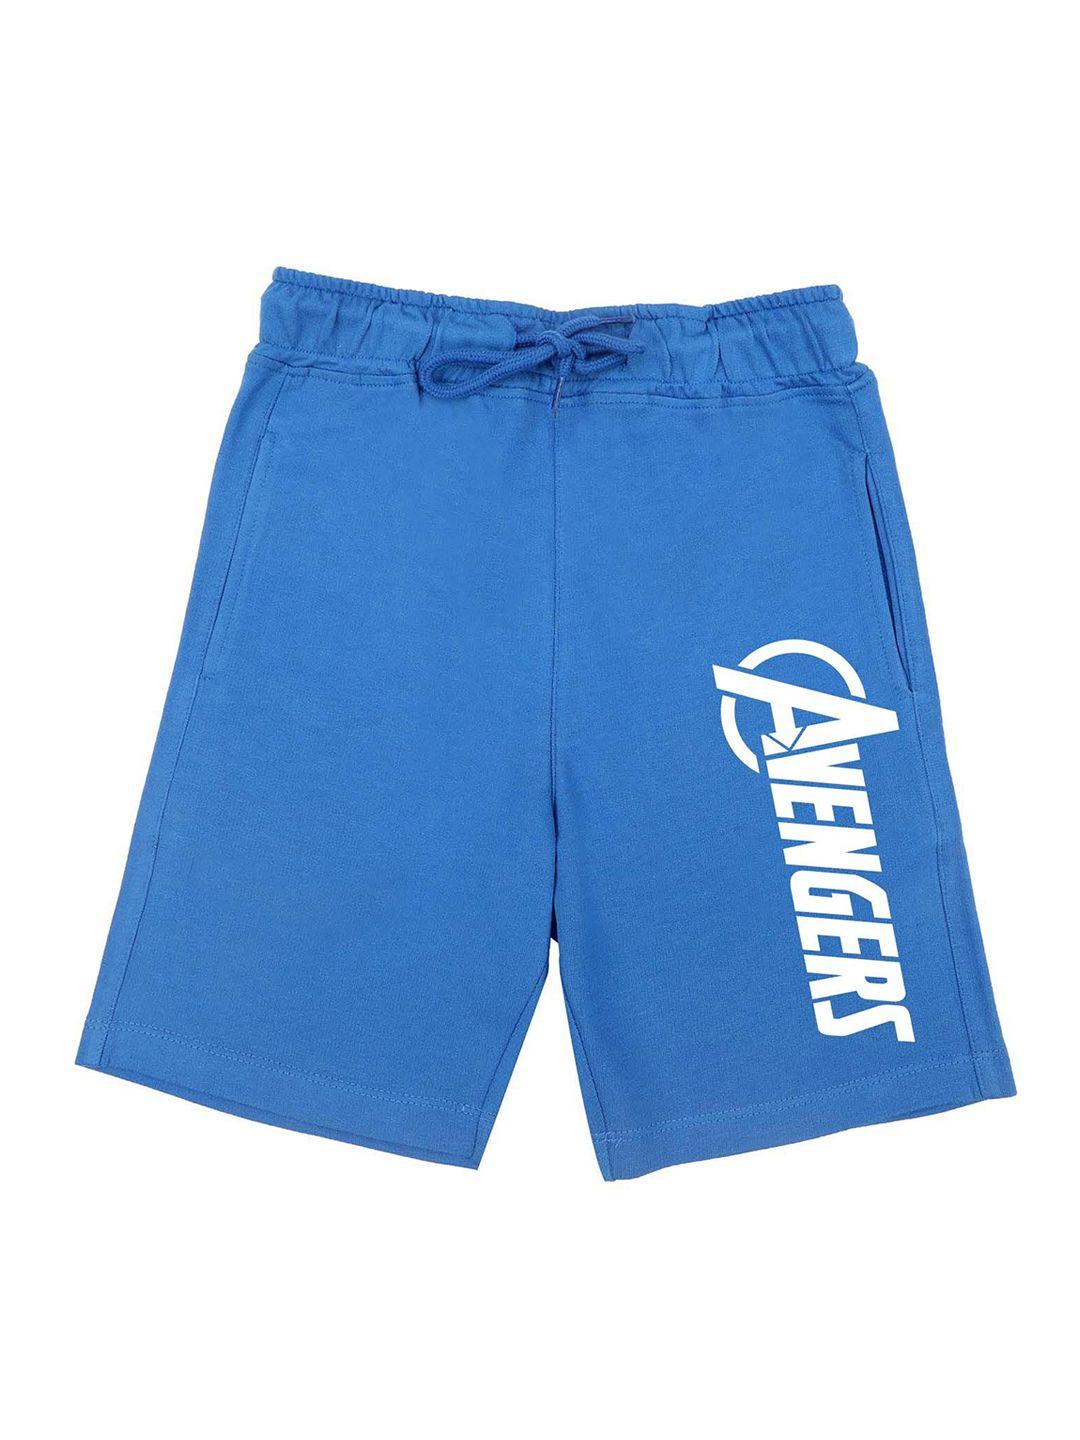 marvel by wear your mind boys blue avengers shorts